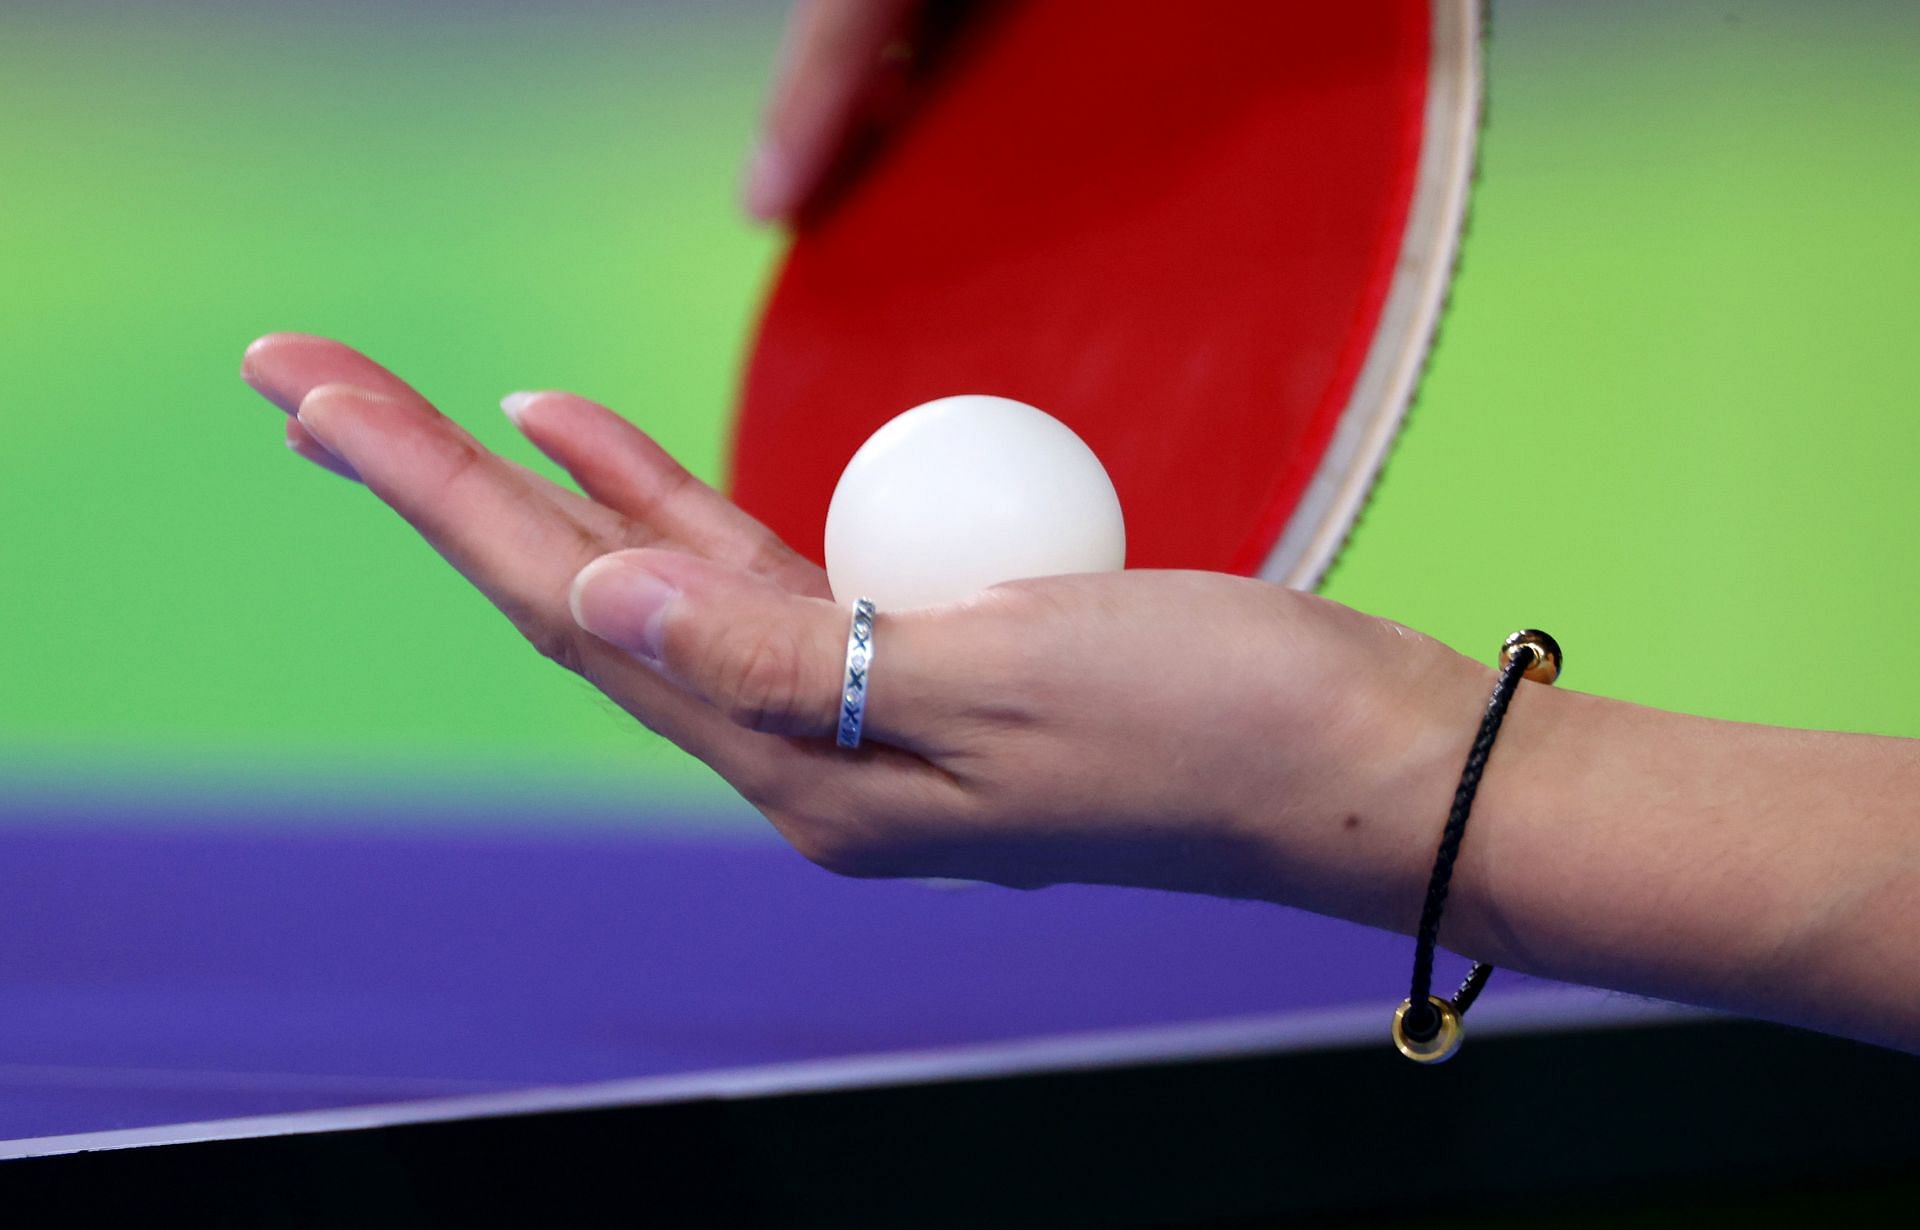 Table Tennis - Commonwealth Games: Day 8